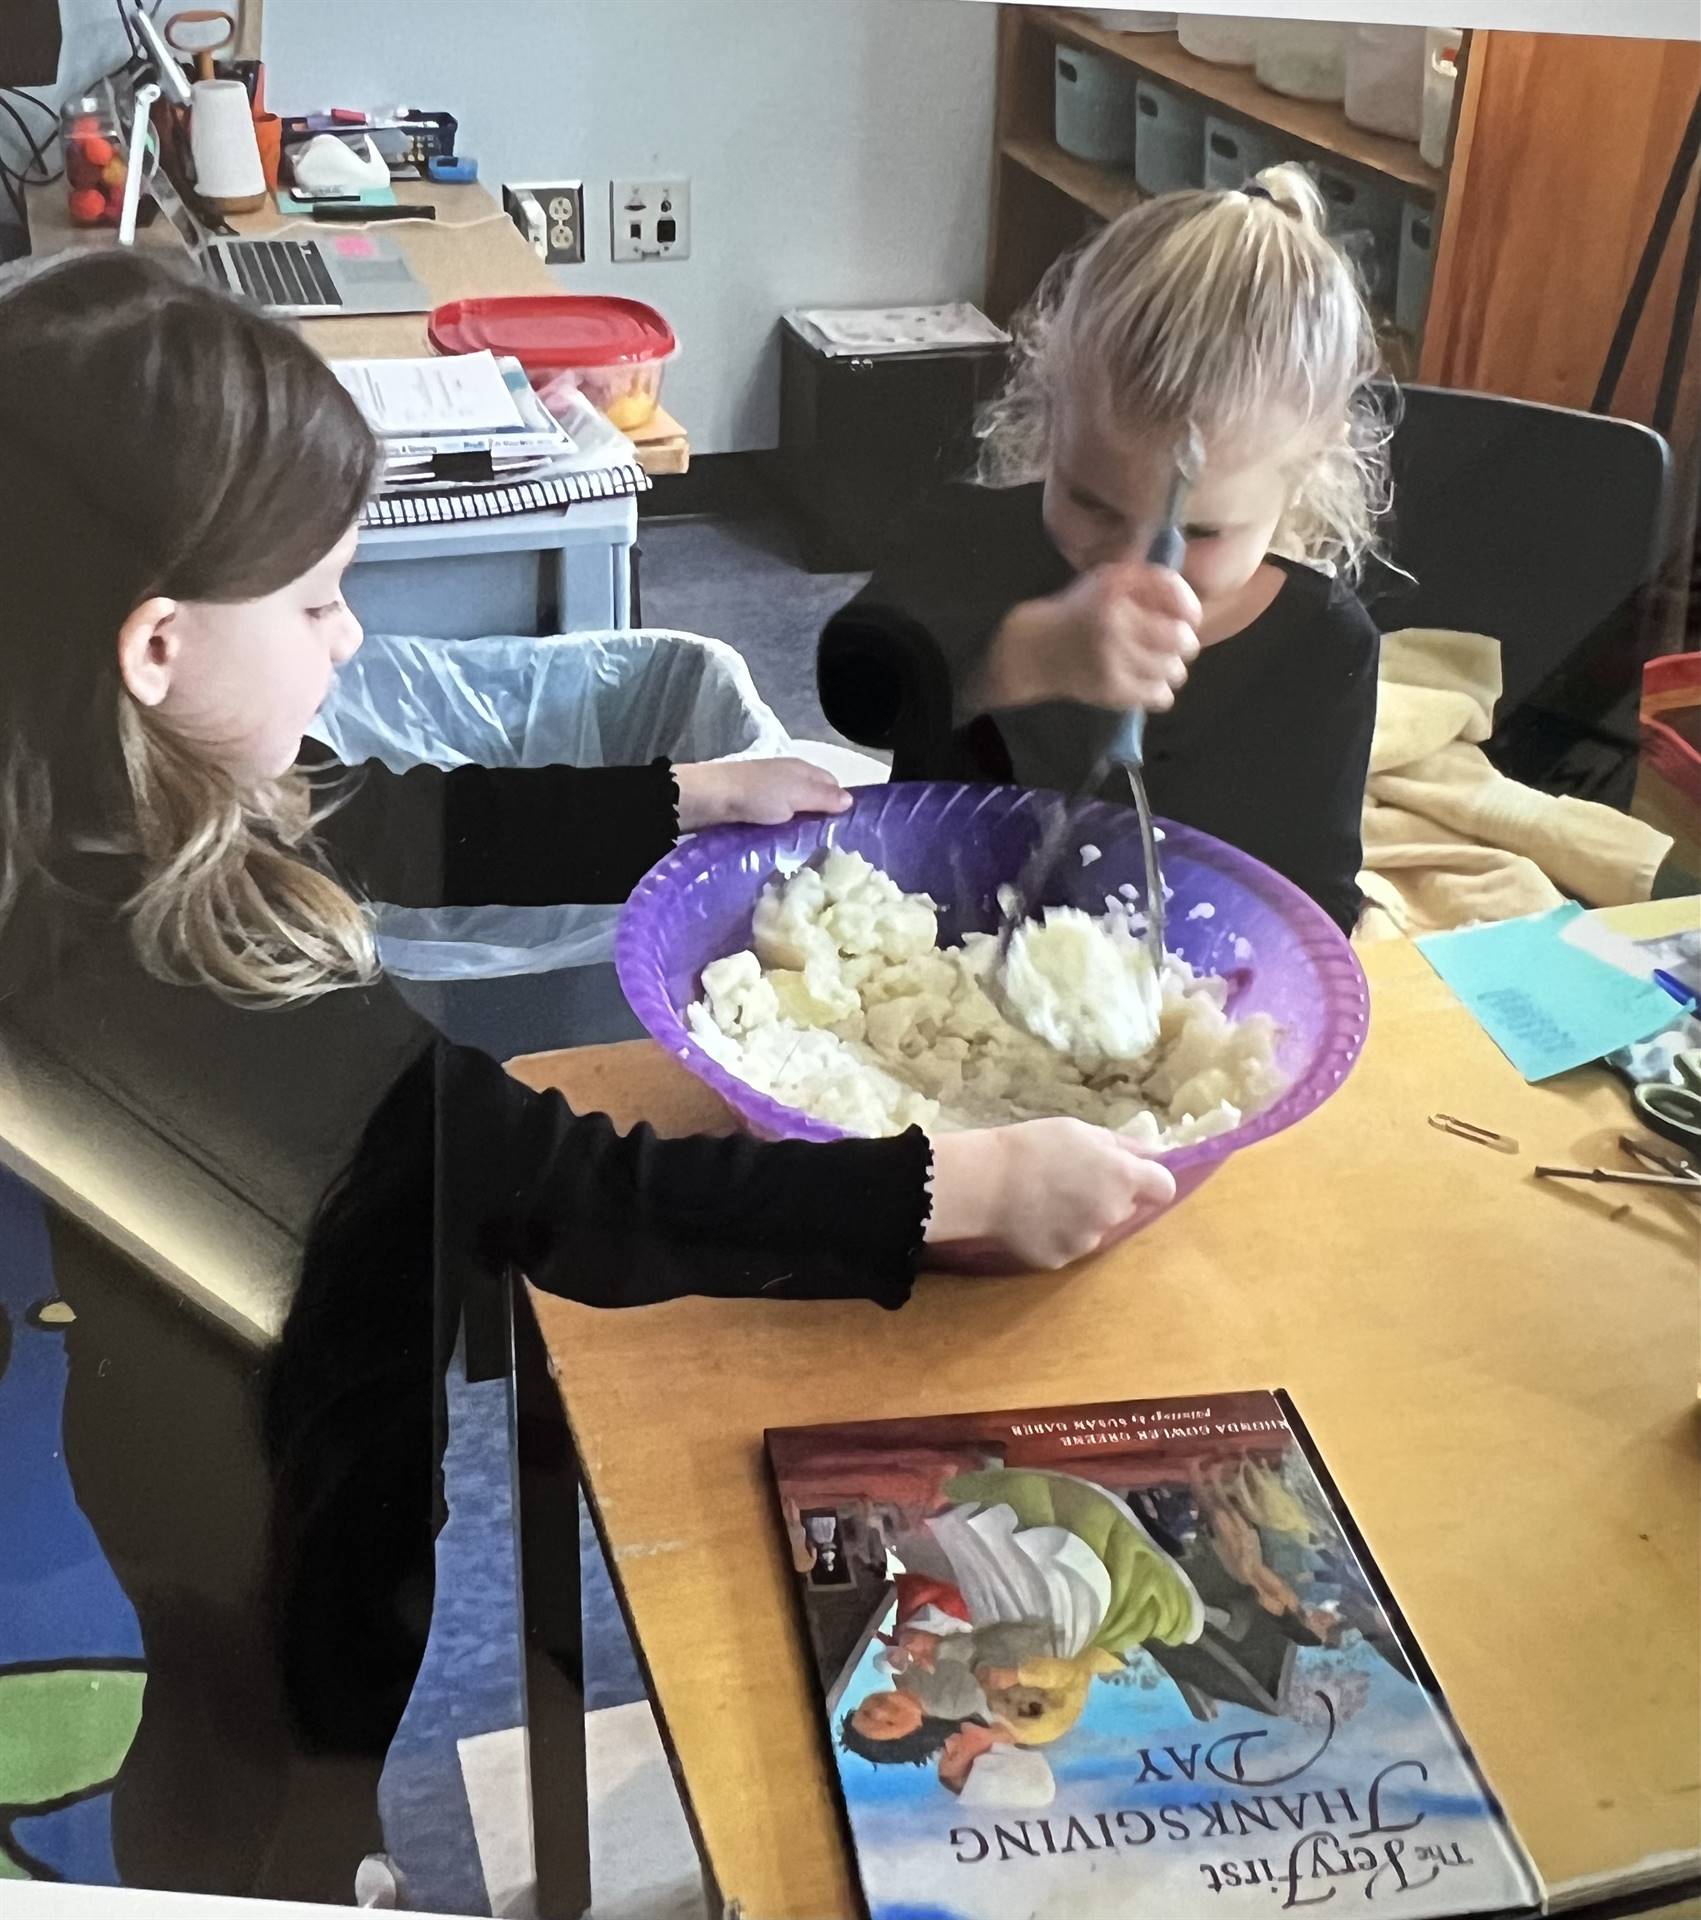 2 students take a scoop of mashed potatoes from a bow.